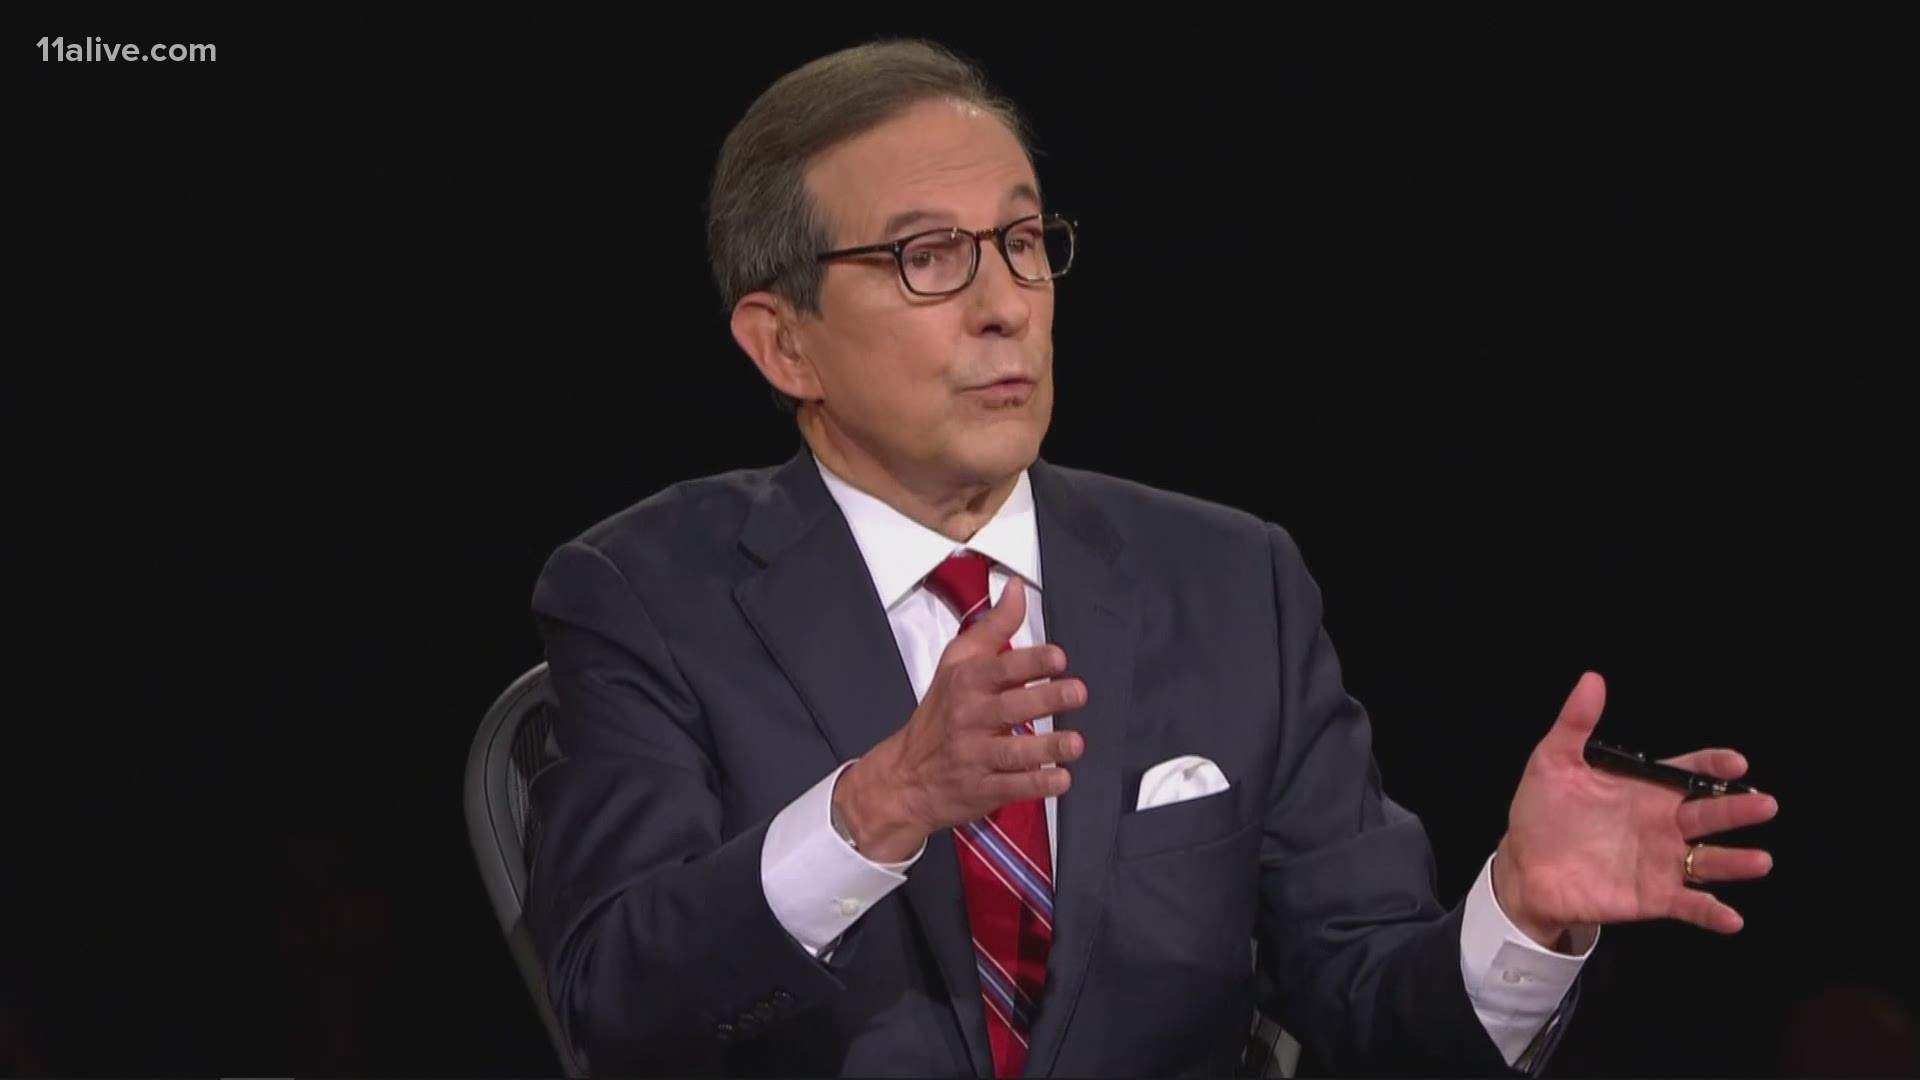 After numerous interruptions in the presidential debate, moderator Chris Wallace asks President Trump to honor the agreement his campaign made.